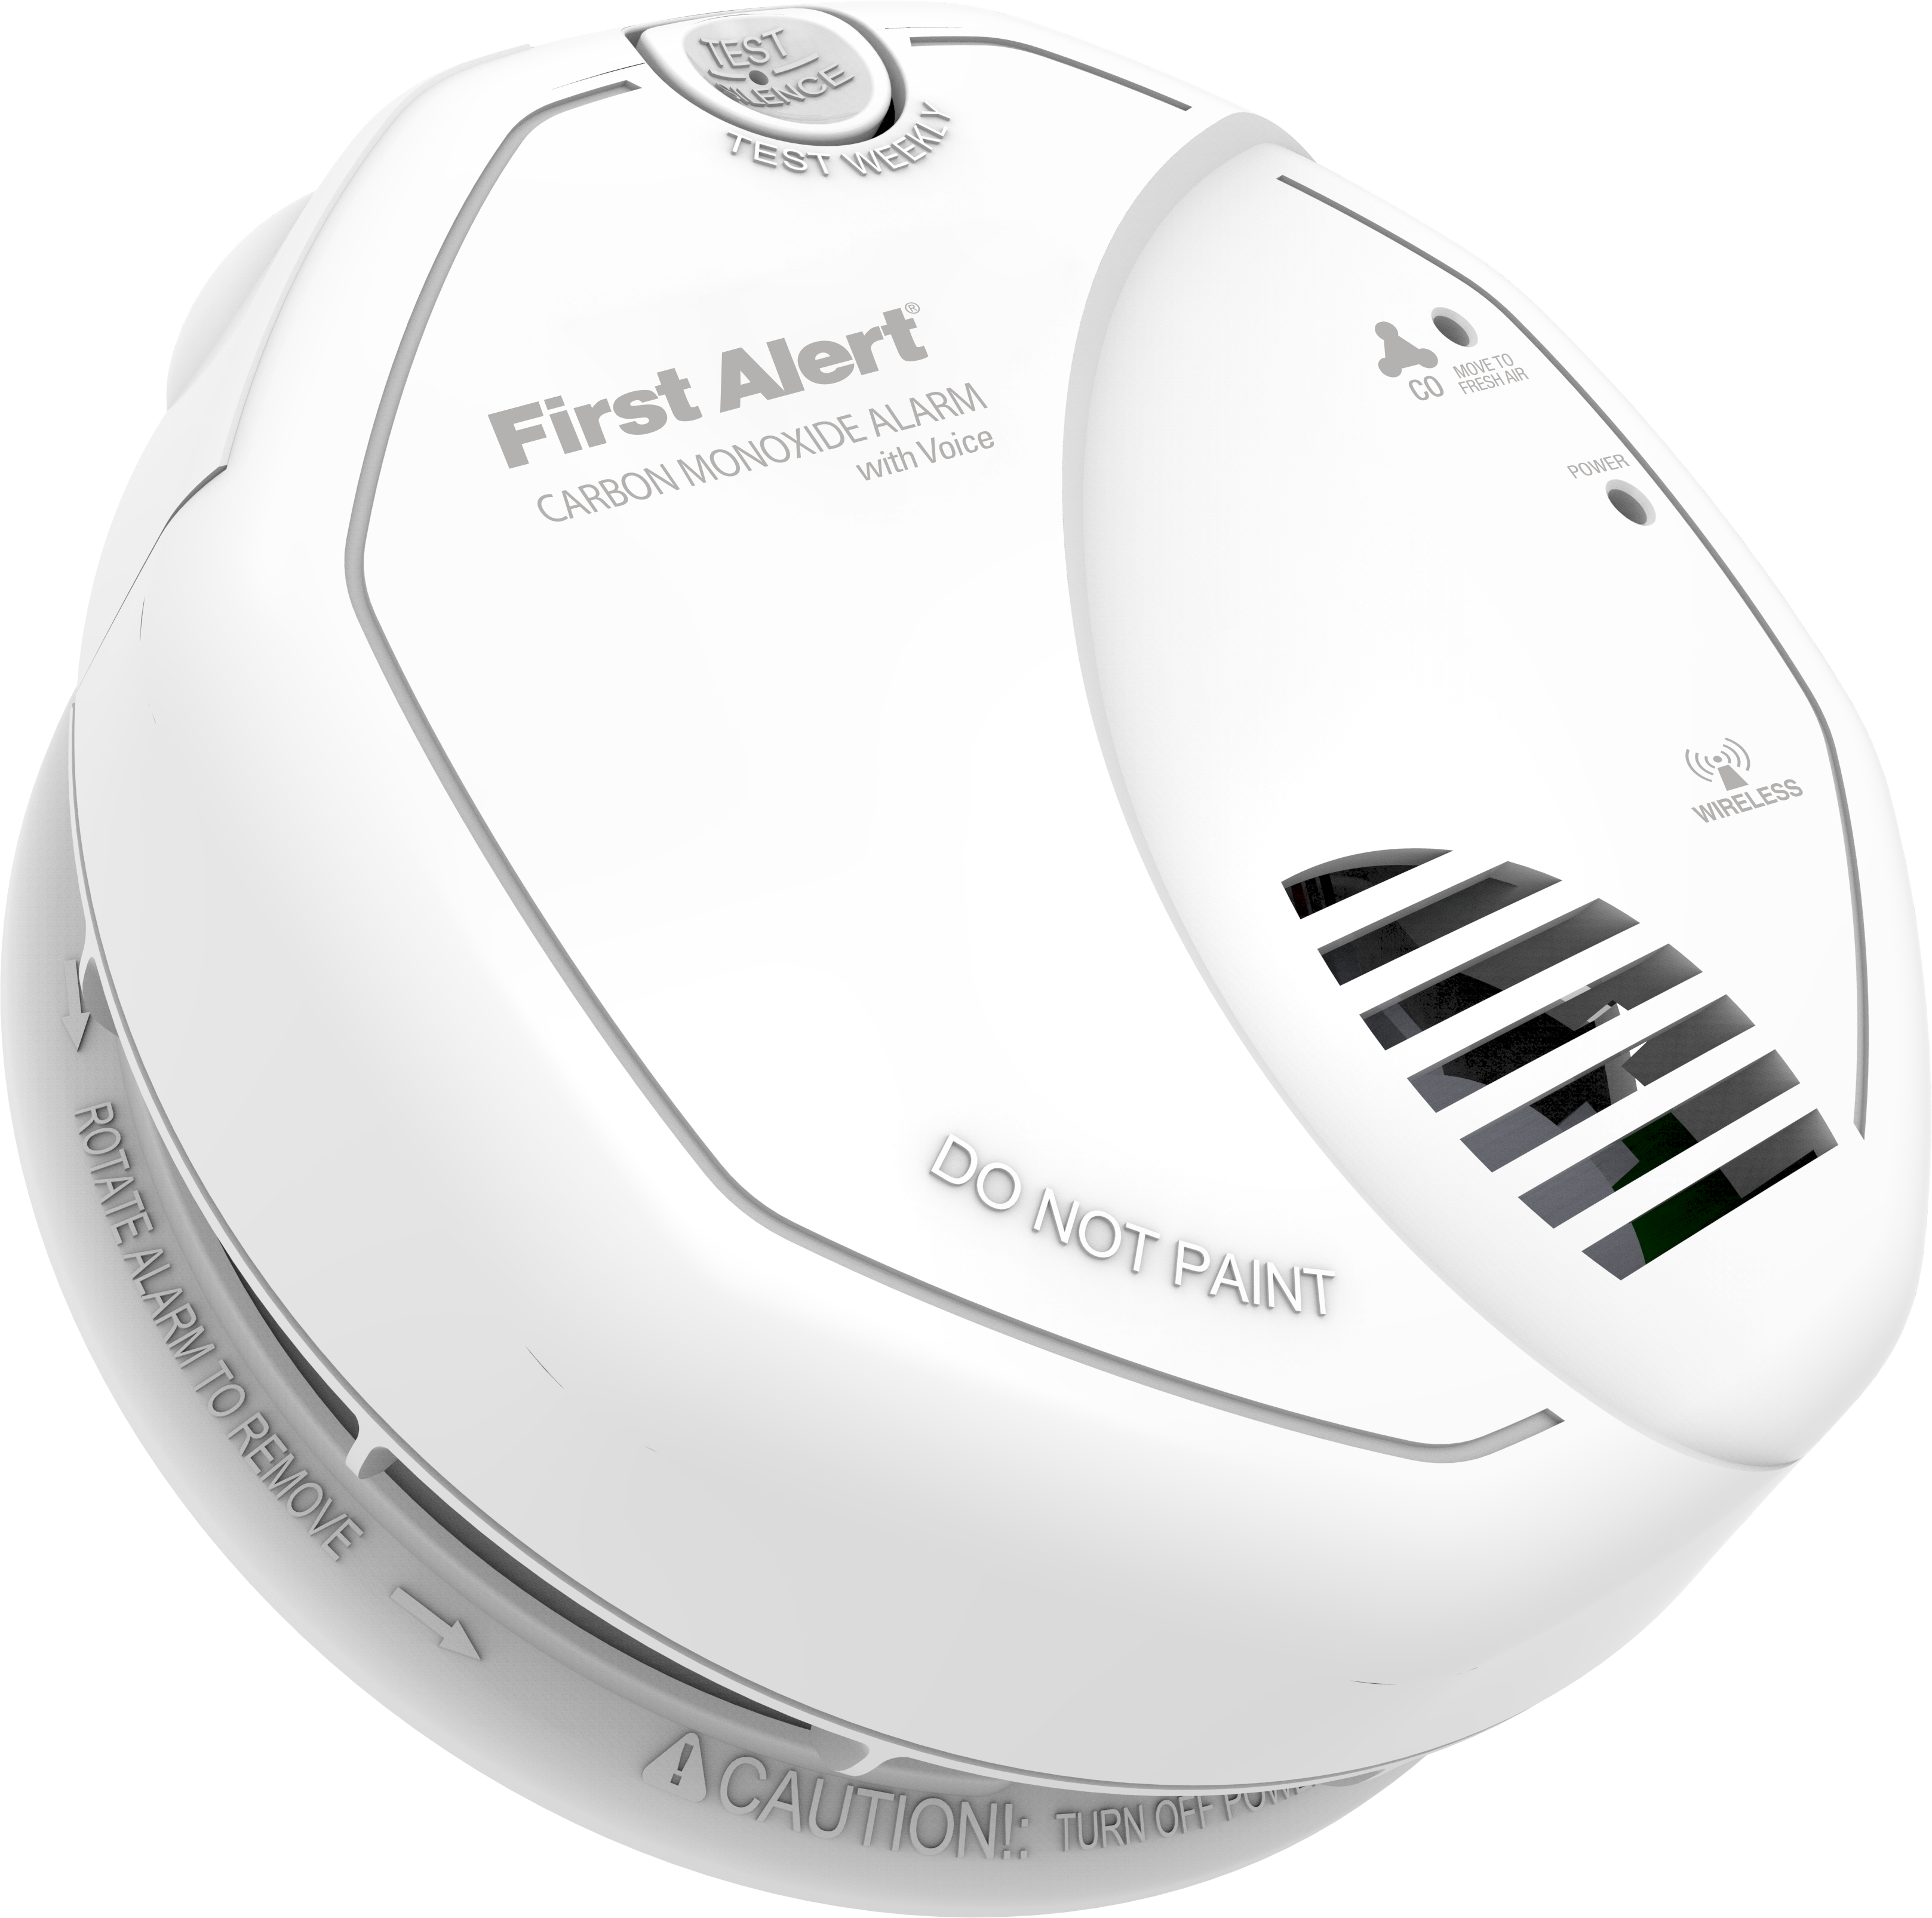 BRK Wireless Interconnect Alarms provide a cost effective solution when it comes to renovation and retrofit projects where interconnectability is a requirement. Easily interconnect between floors and new to existing construction wirelessly. CO alarm...